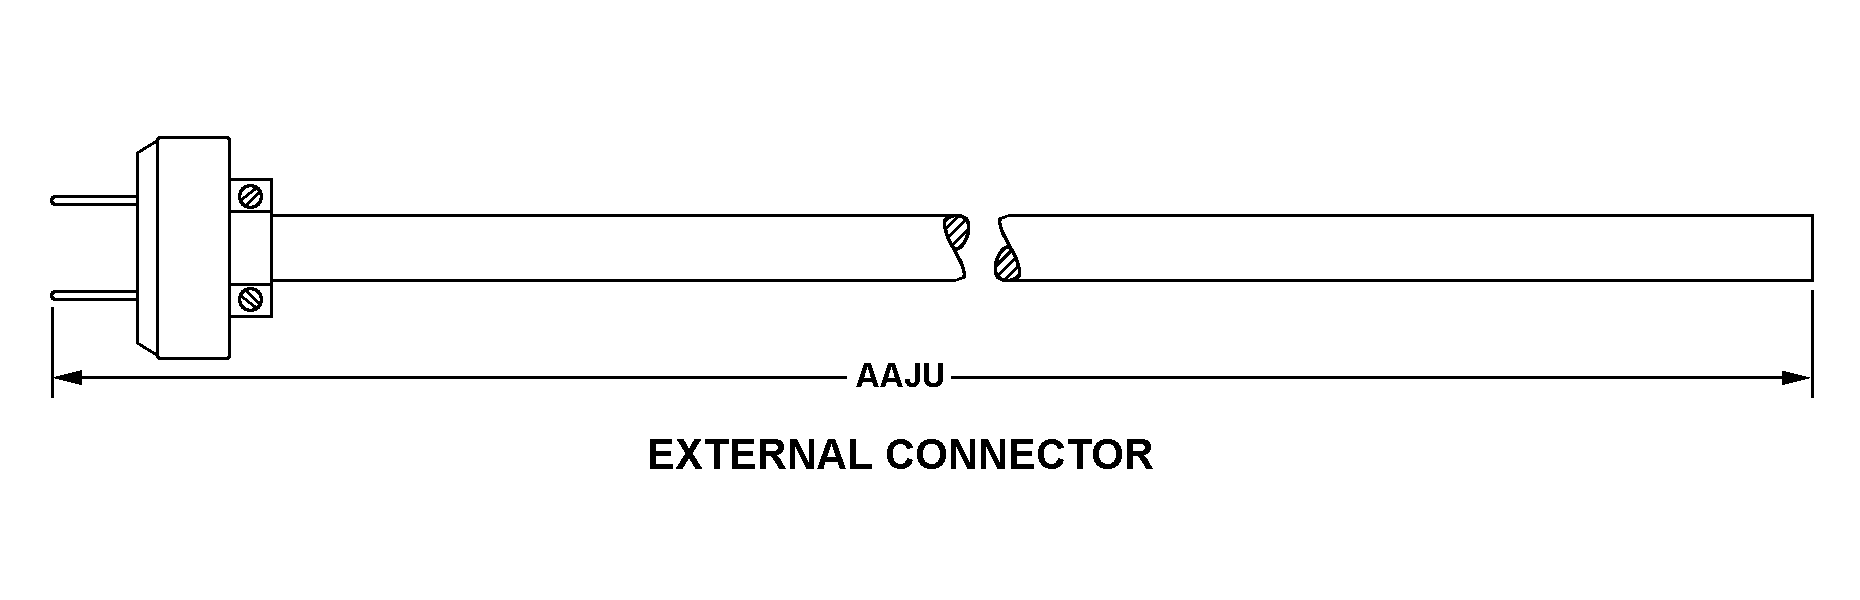 EXTERNAL CONNECTOR style nsn 5995-01-347-8958